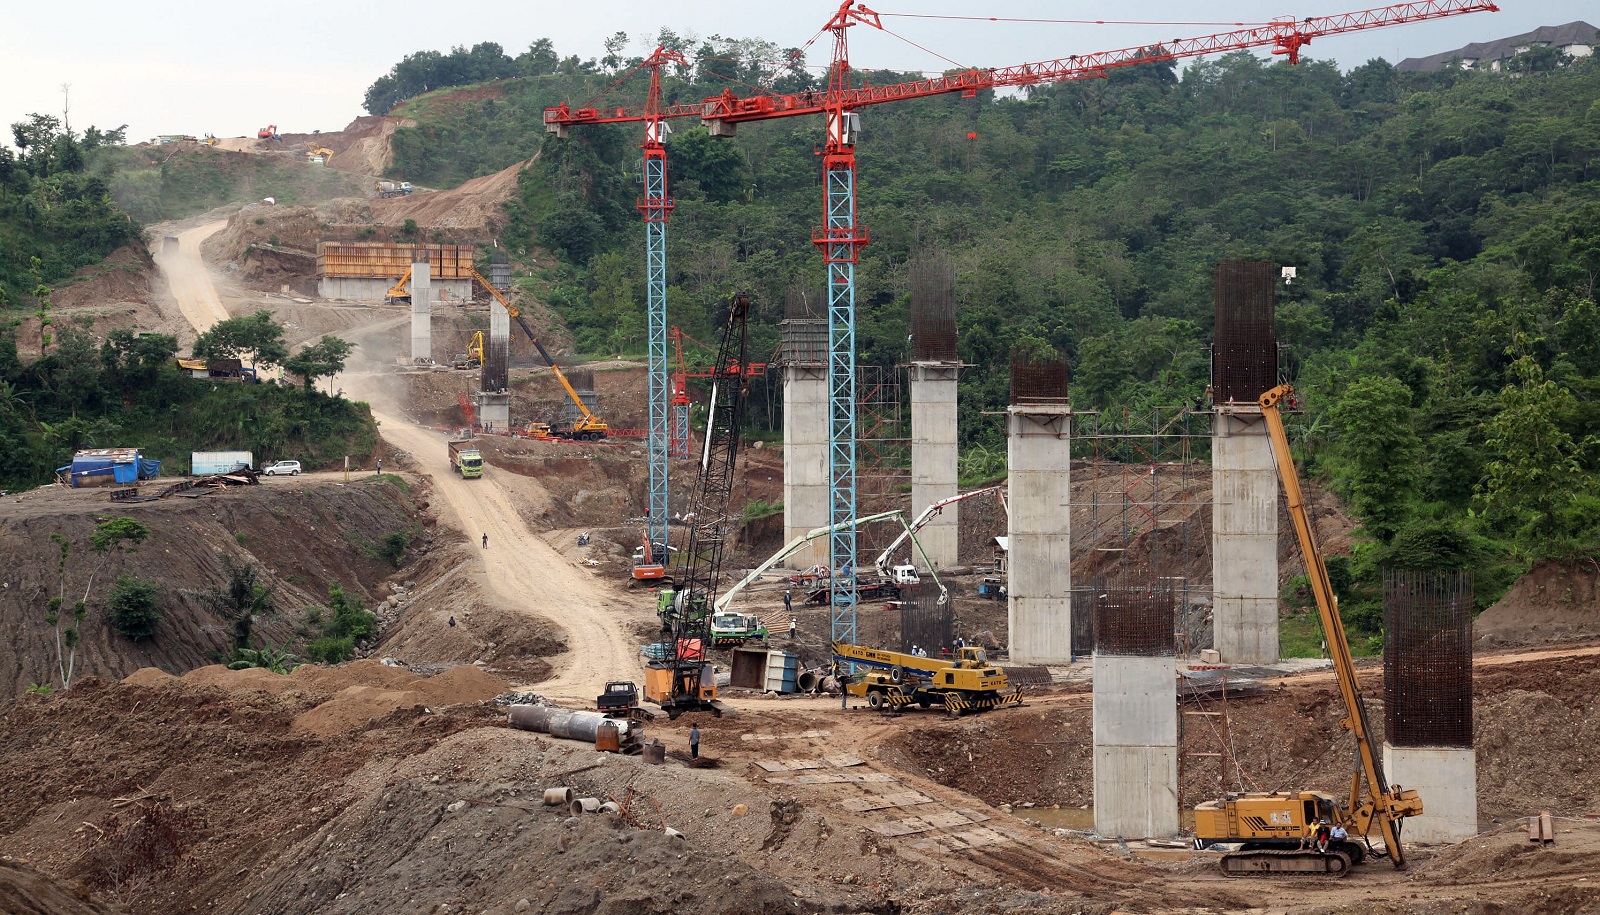  Highway construction in Semarang, Indonesia. (Photo: Dimas Ardian/via Getty Images)